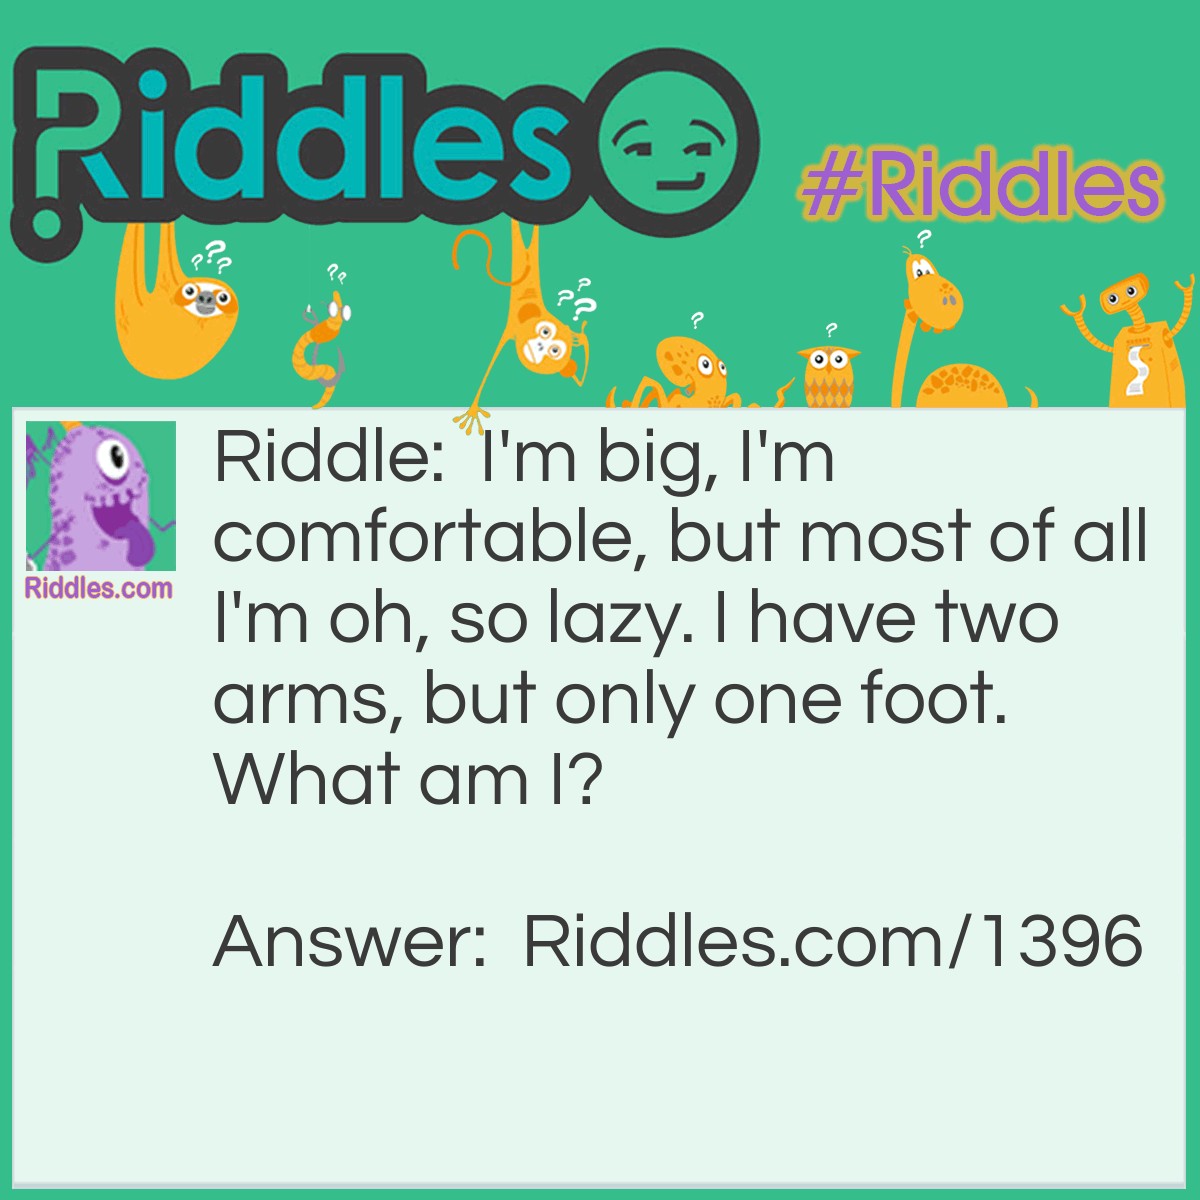 Riddle: I'm big, I'm comfortable, but most of all I'm oh, so lazy. I have two arms, but only one foot.
What am I? Answer: A lazy boy recliner